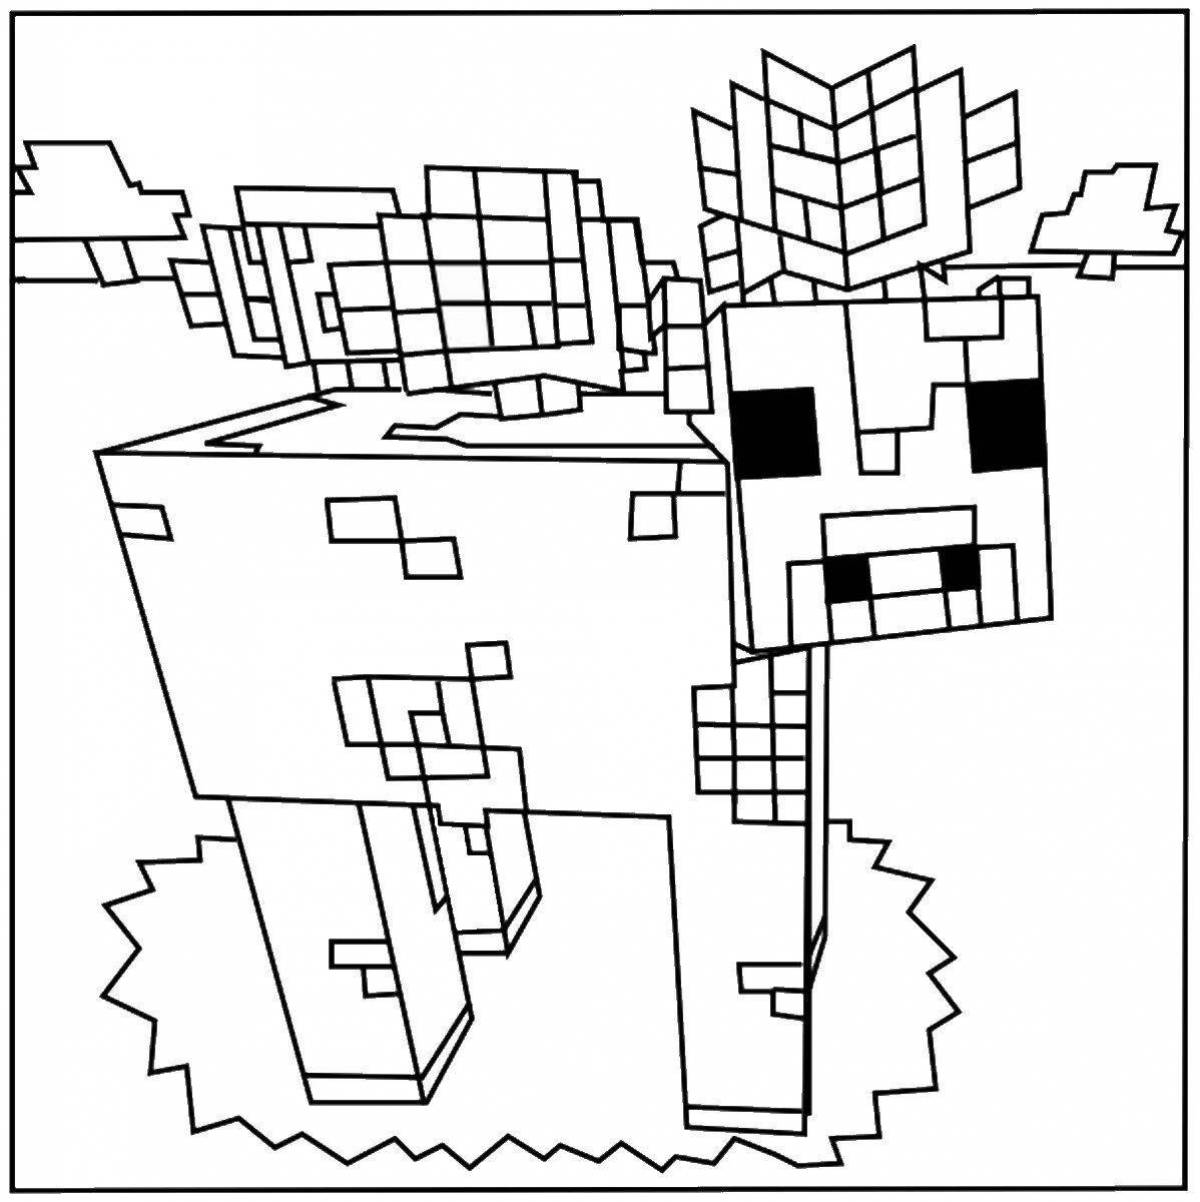 Colorful minecraft world coloring page